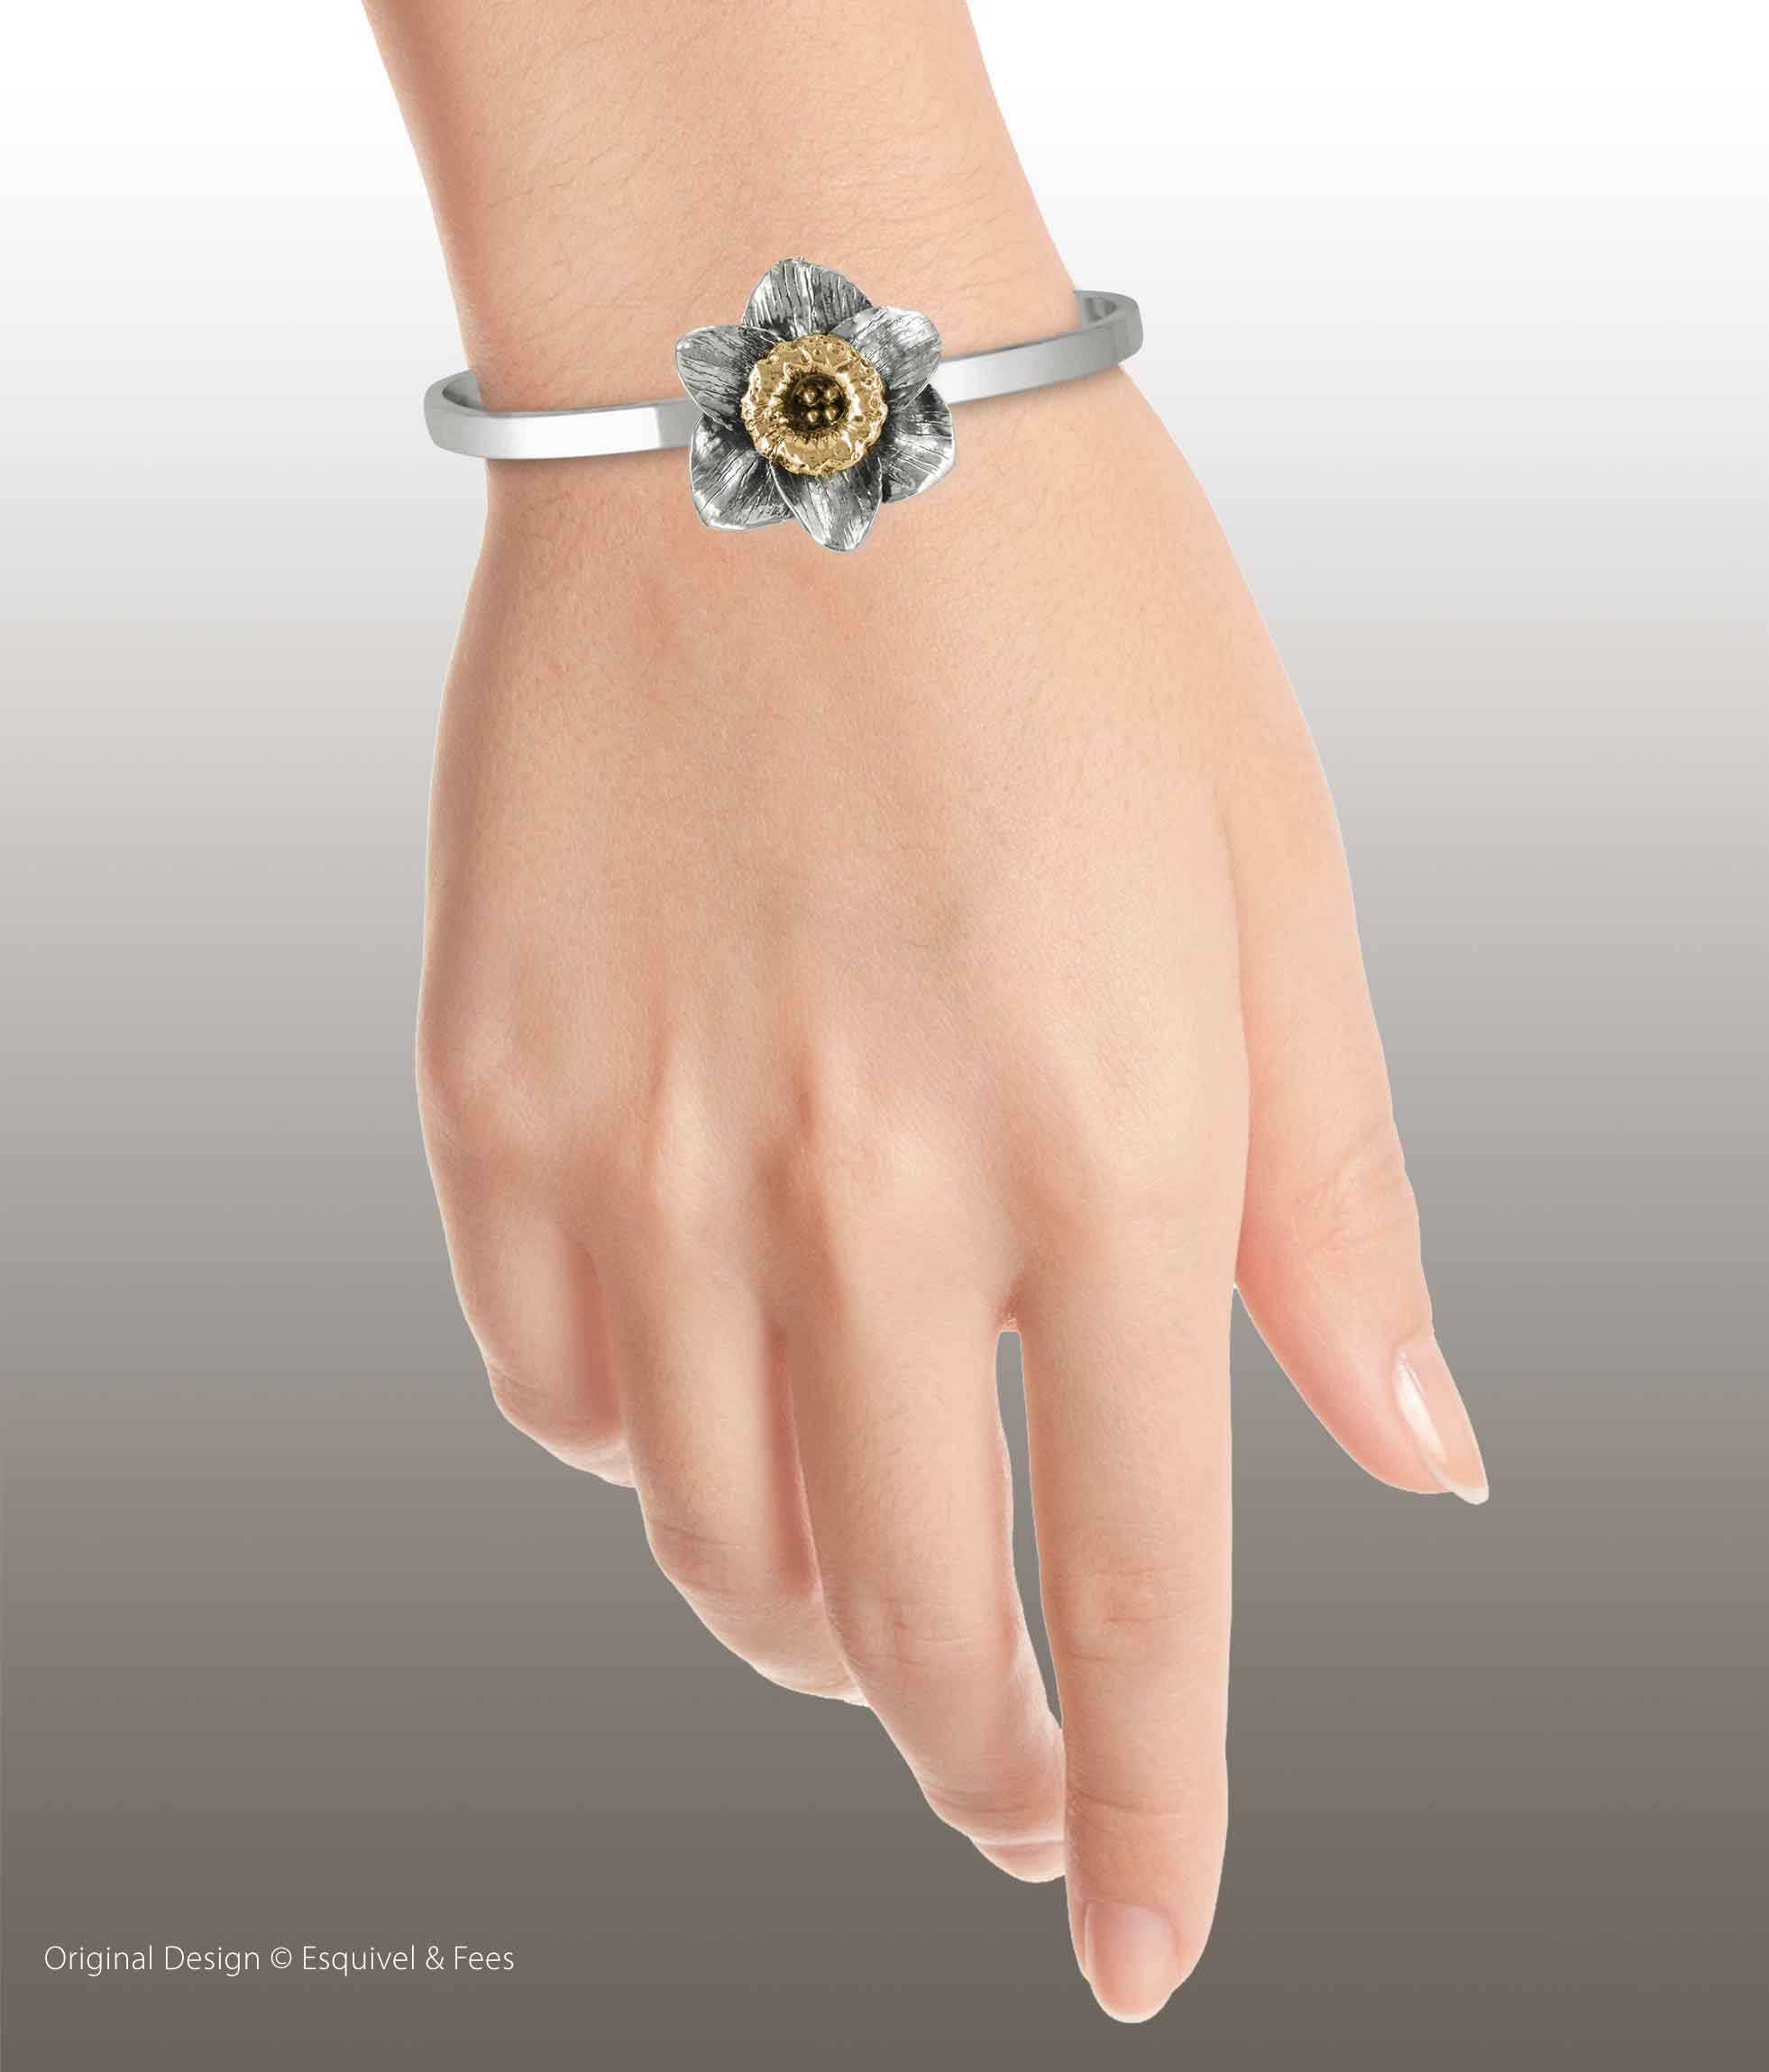 Daffodil Daffodil Flower Bracelet Silver And 14k Gold | Esquivel and Fees |  Handmade Charm and Jewelry Designs